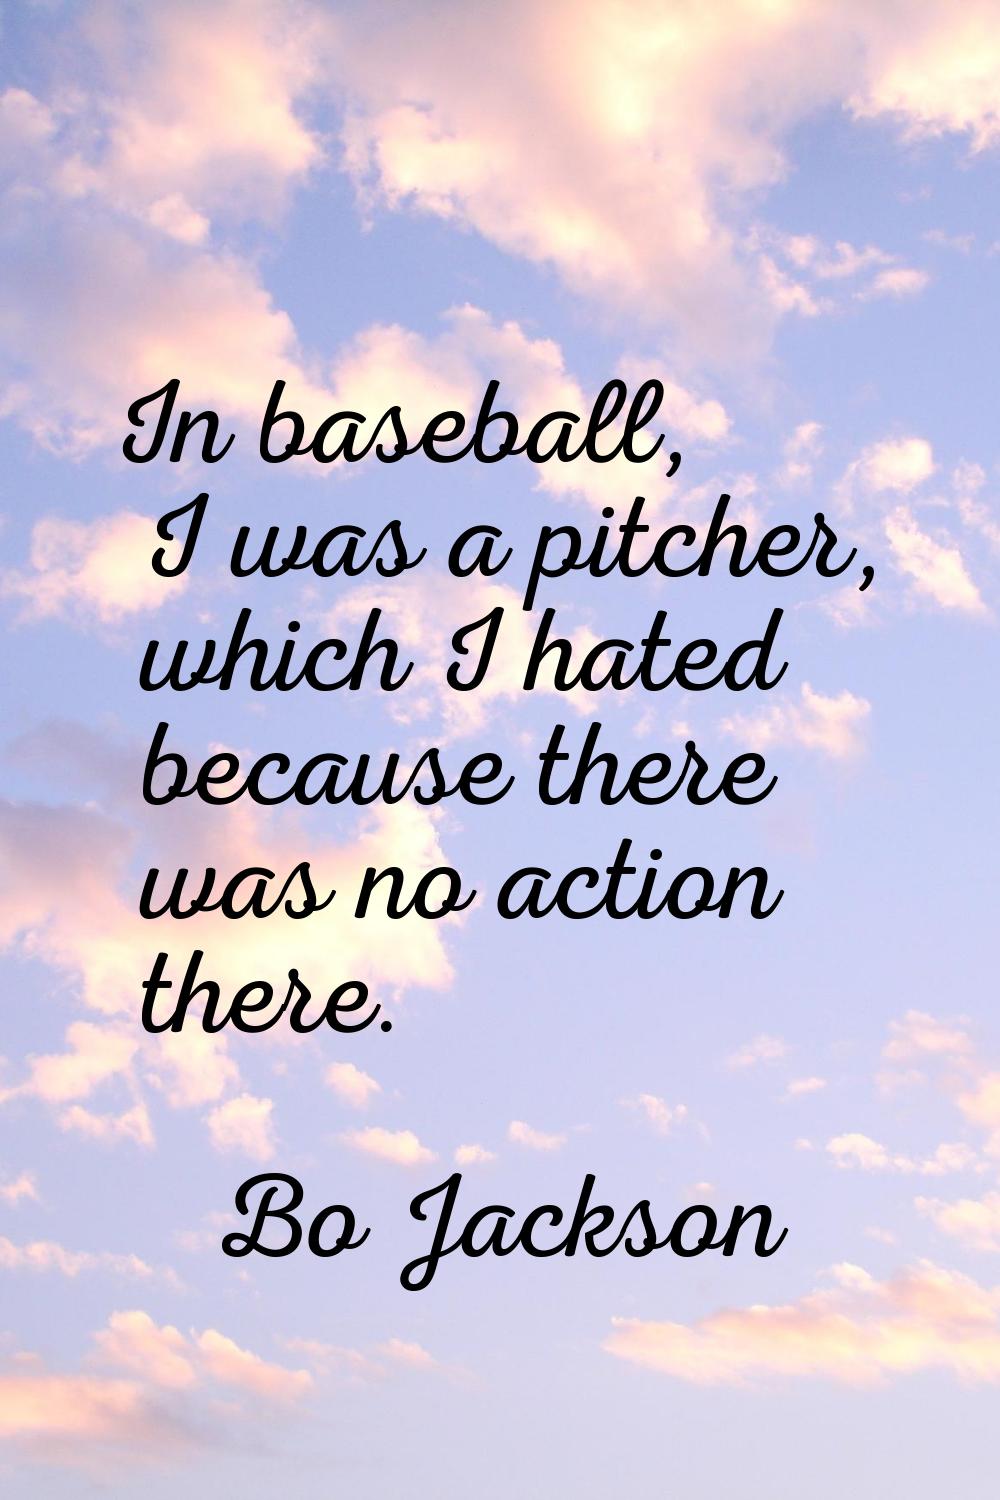 In baseball, I was a pitcher, which I hated because there was no action there.